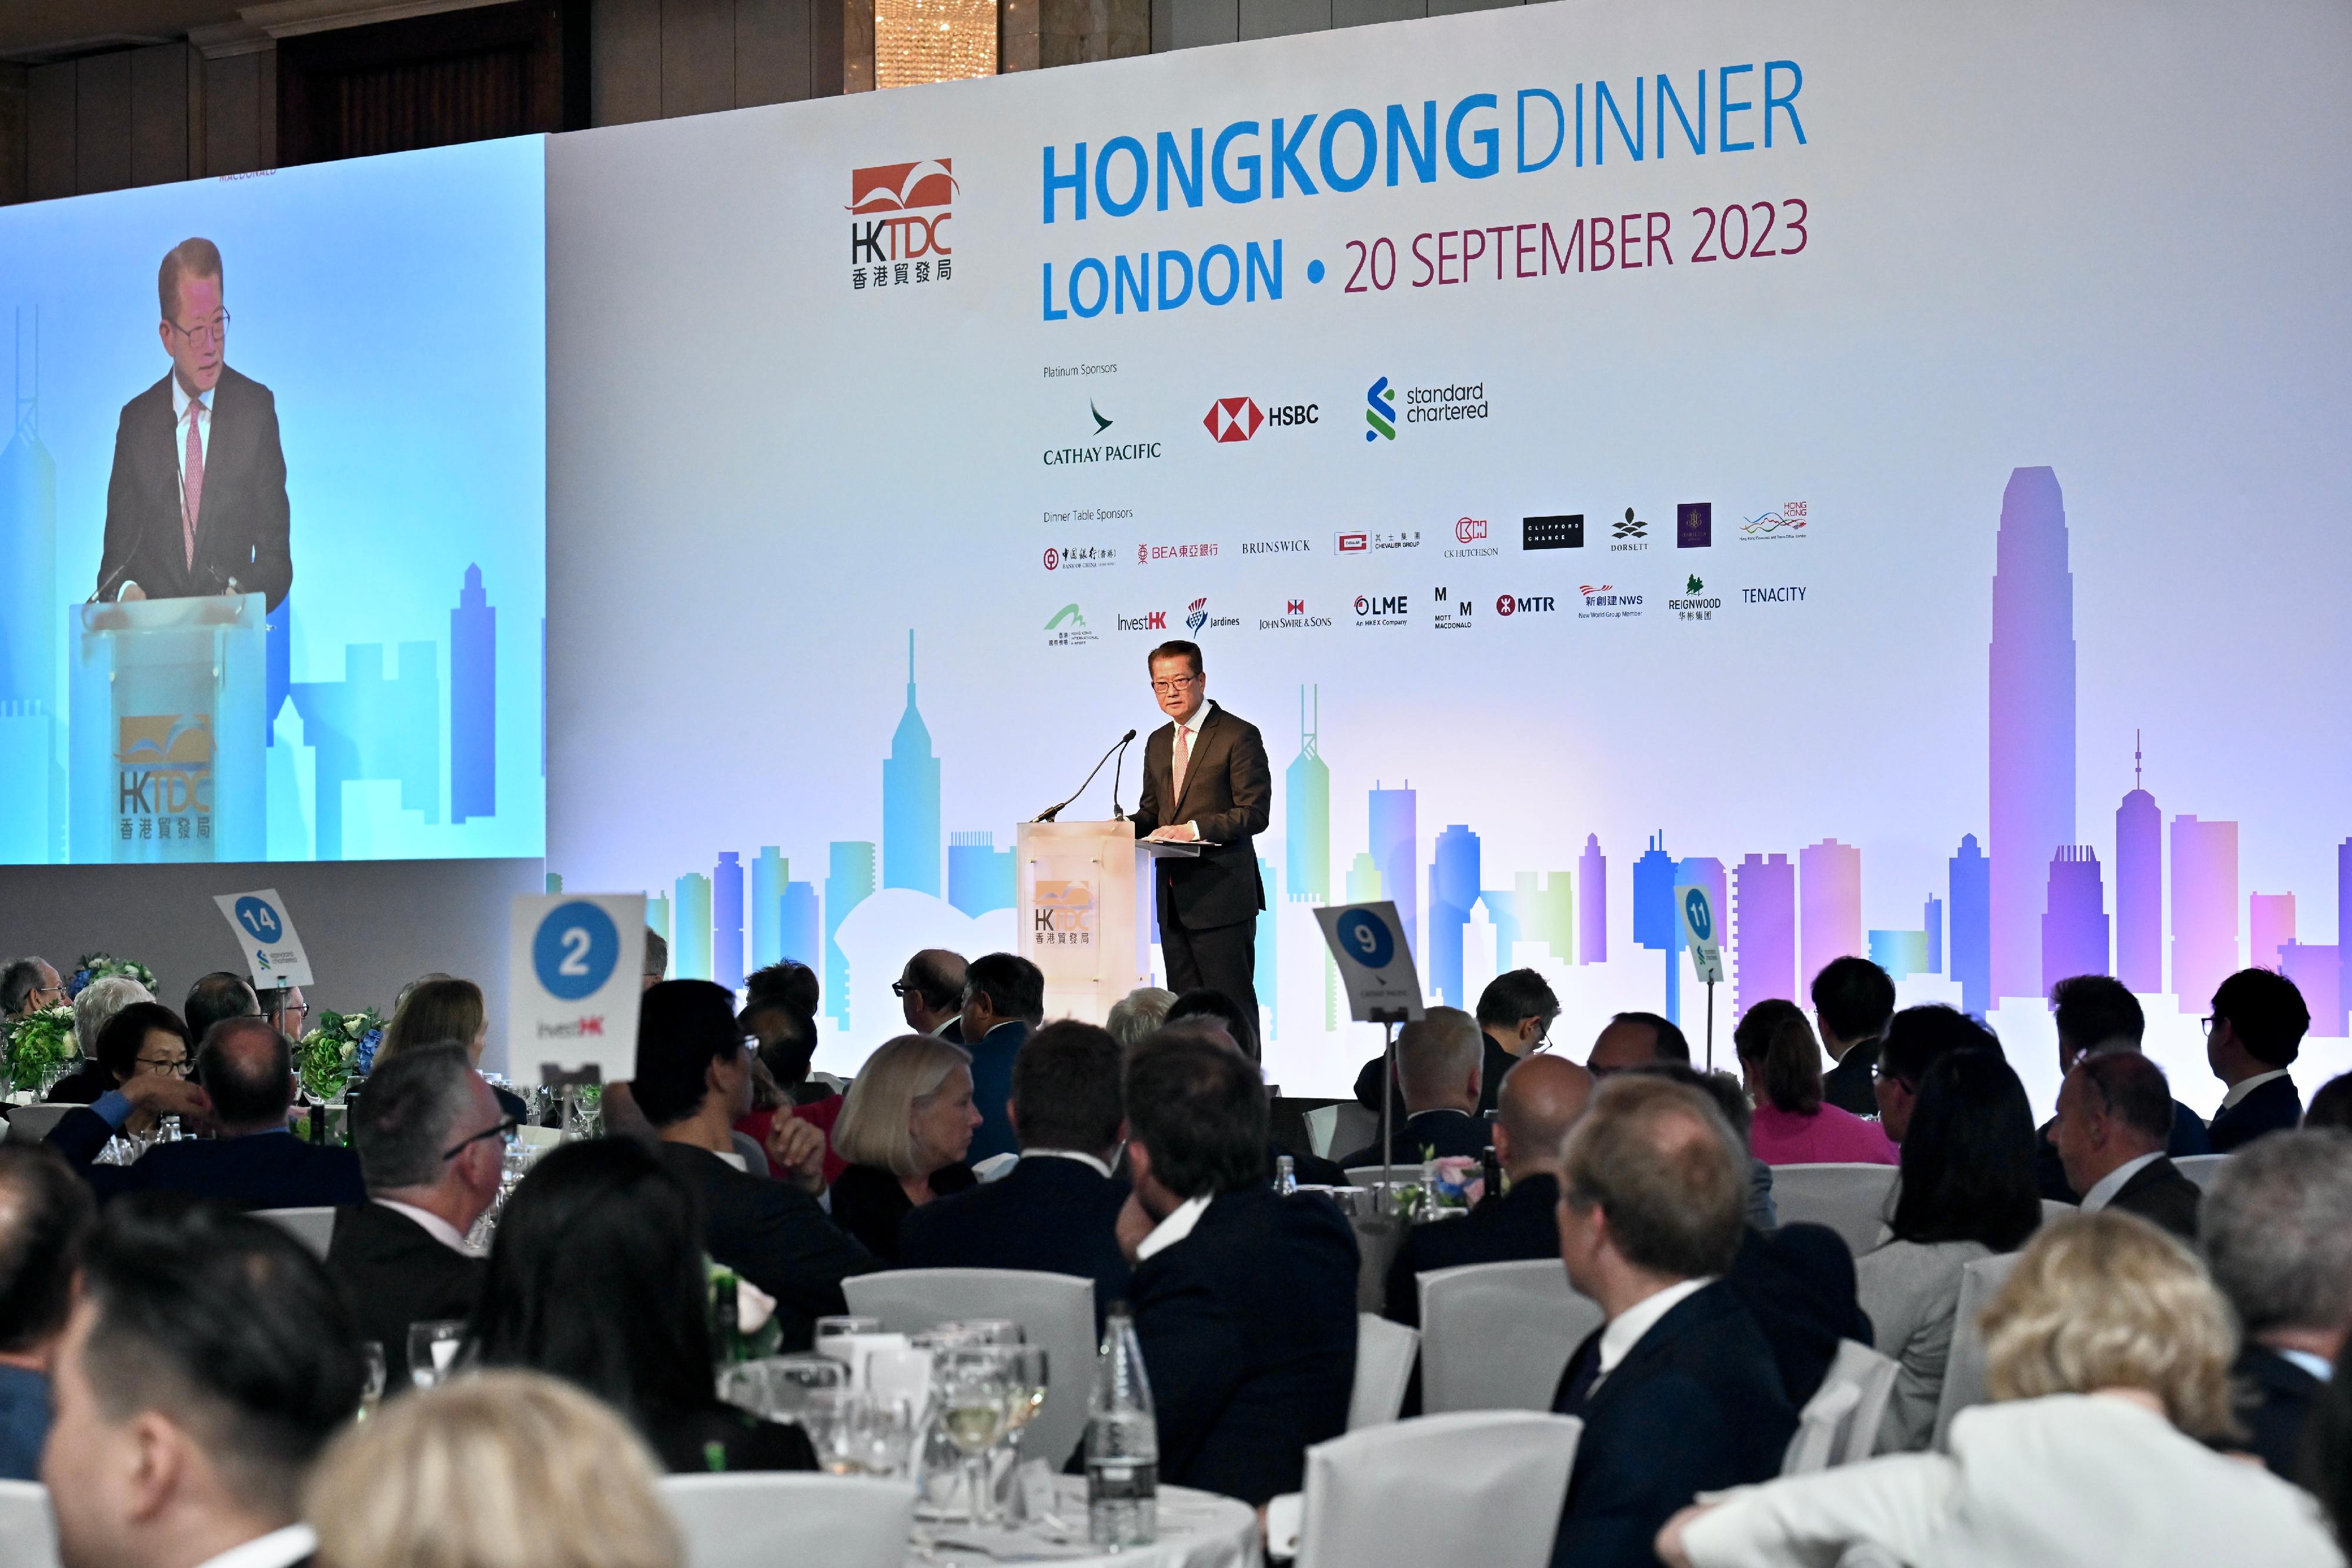 The Financial Secretary, Mr Paul Chan, arrived in London yesterday (September 20, London time) to begin his visit to London, and attended the Hong Kong Dinner organised by the Hong Kong Trade Development Council. Photo shows Mr Chan delivering a keynote speech at the dinner.